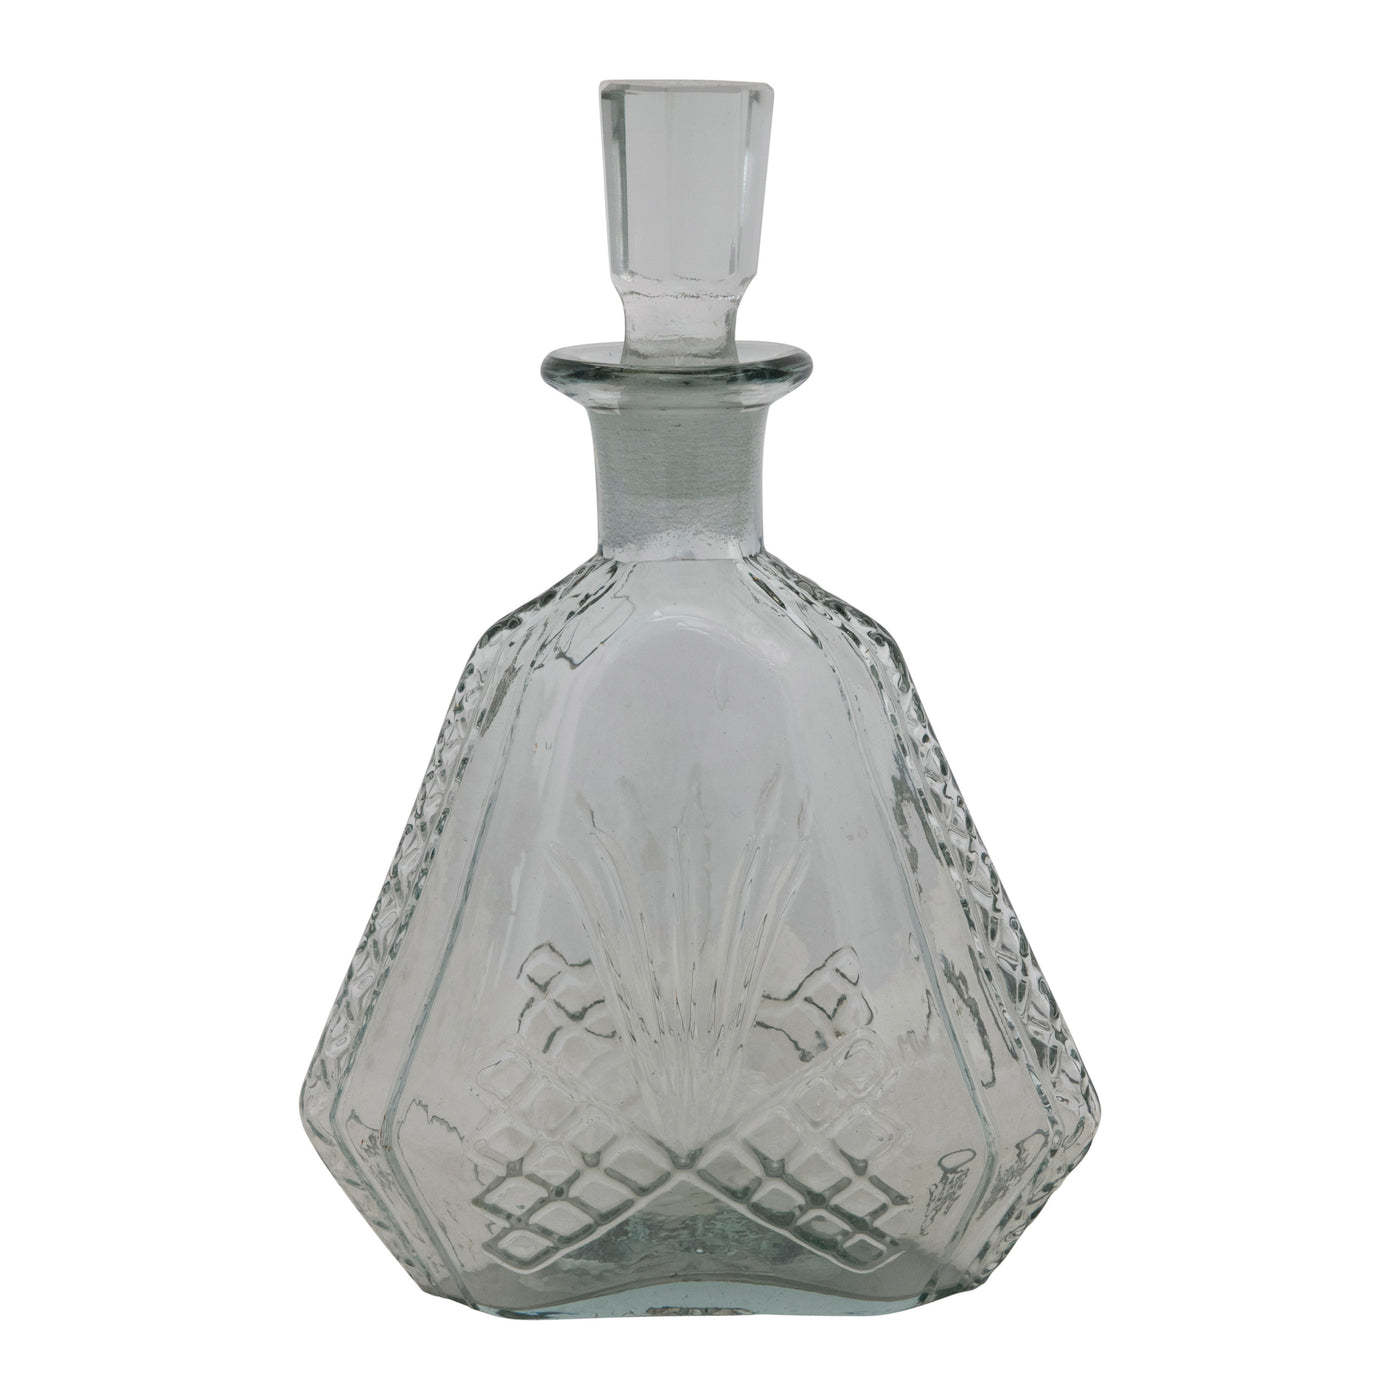 32 oz. Etched Glass Decanter